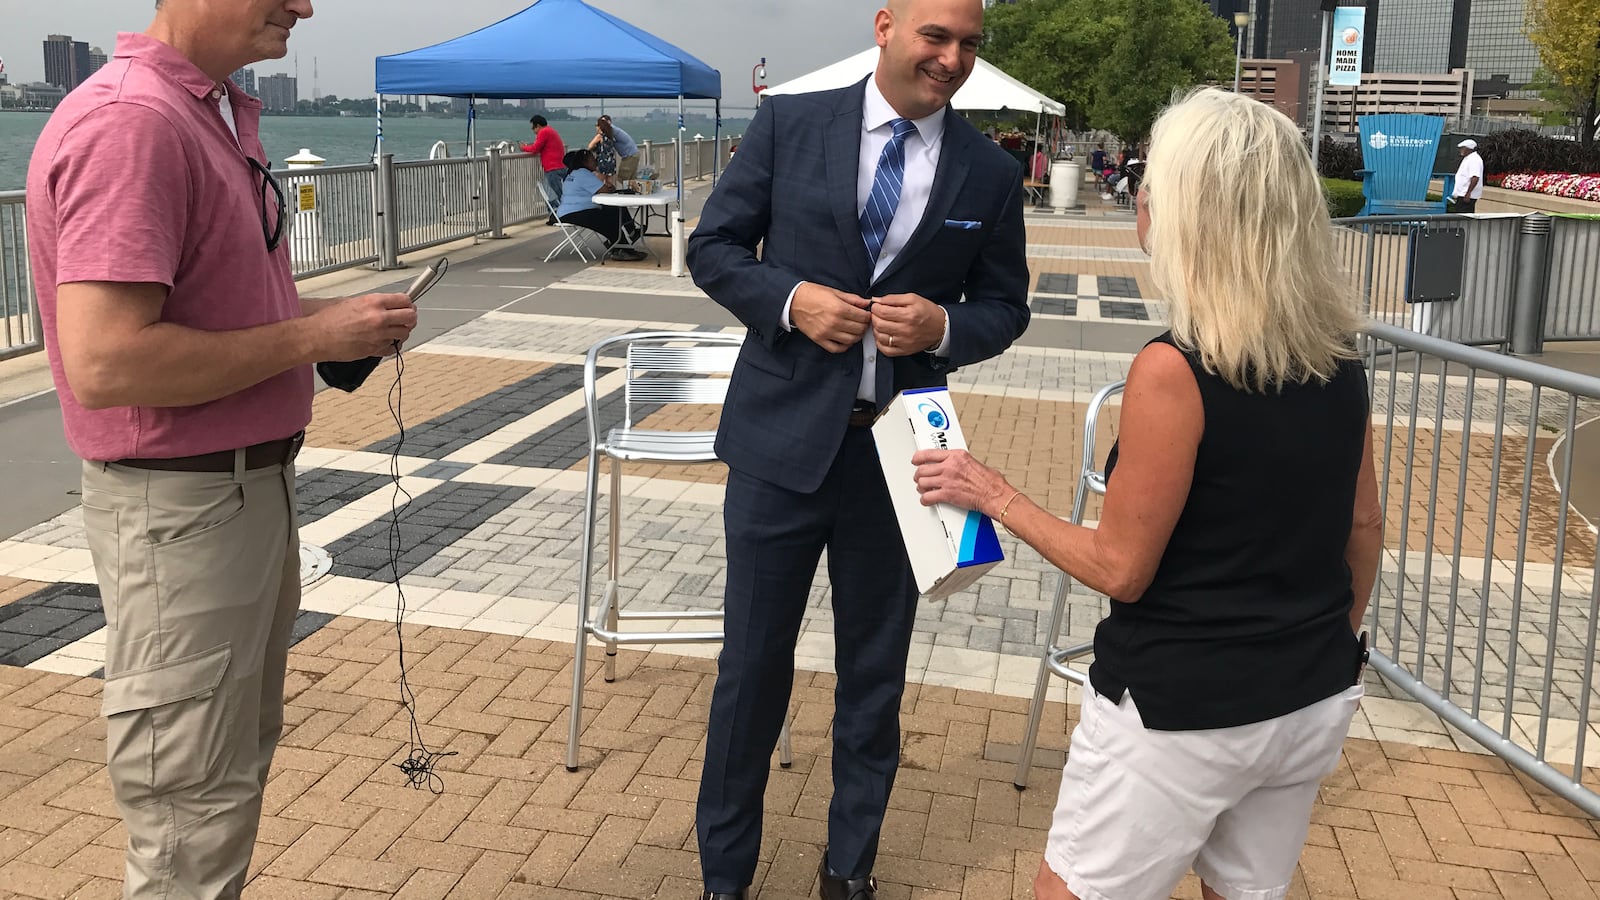 Detroit schools Superintendent Nikolai Vitti prepares for a TV interview on Detroit's RiverWalk in August 2017, before the start of his first school year at the helm of the district.